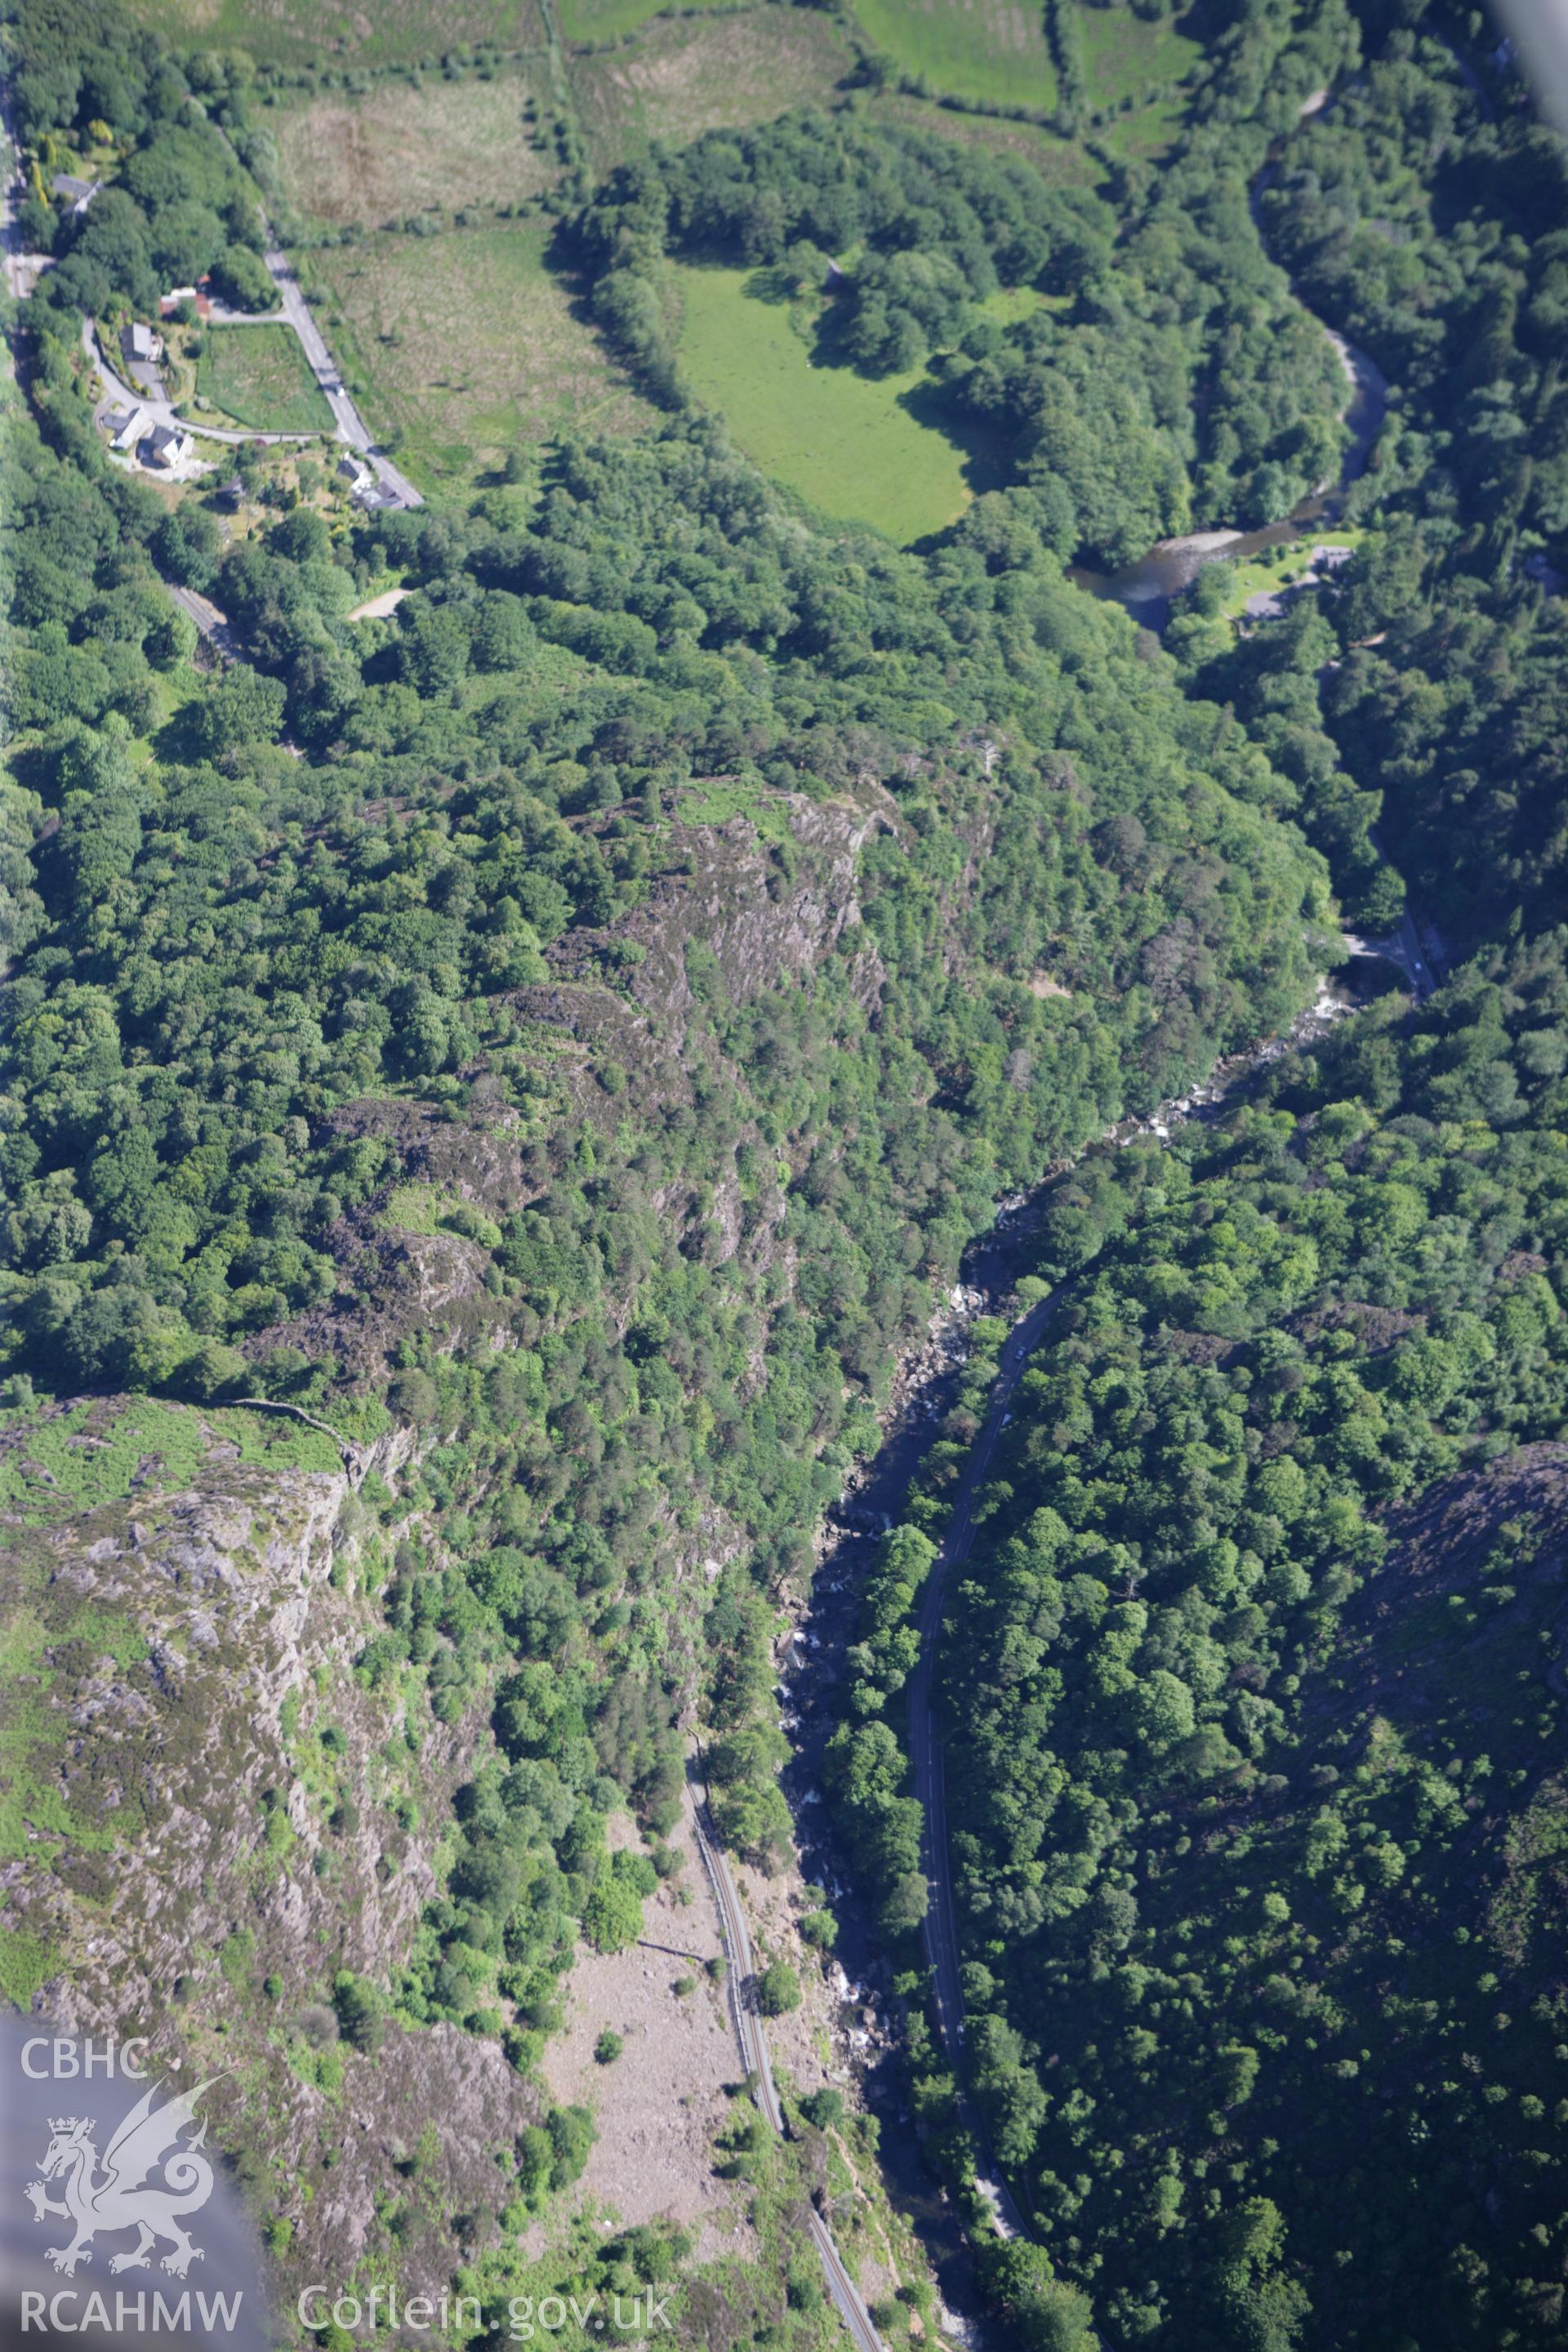 RCAHMW colour oblique photograph of Pont Aberglaslyn, Aberglaslyn Pass. Taken by Toby Driver on 16/06/2010.